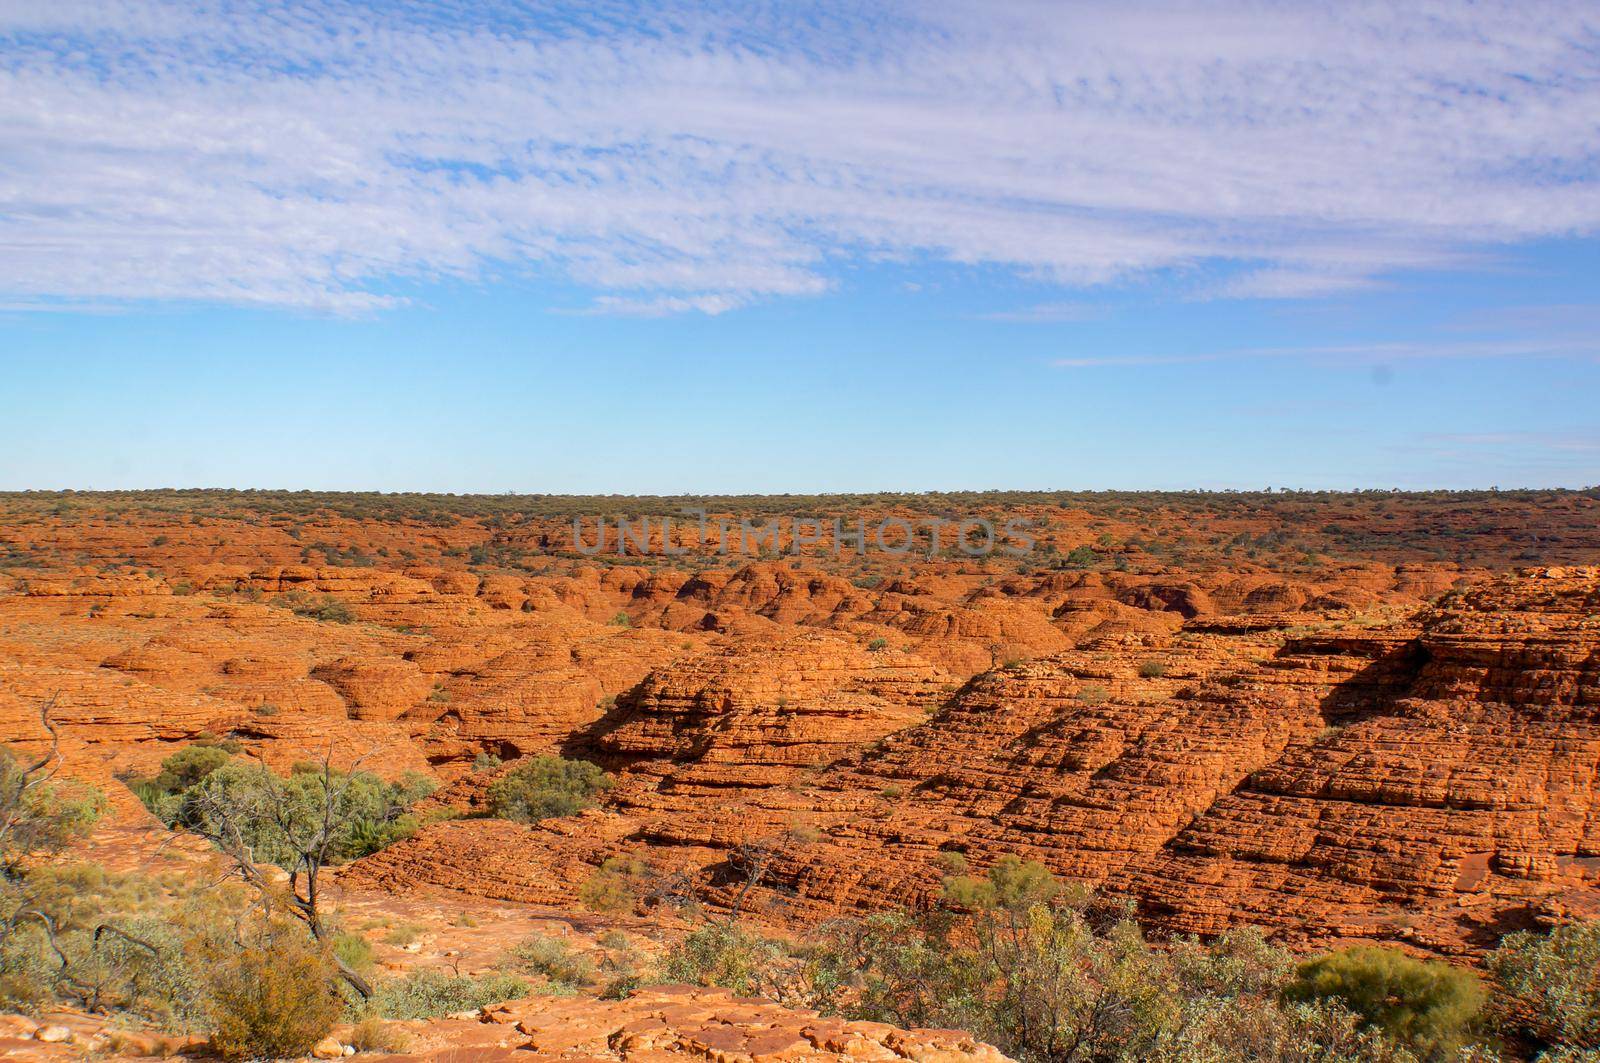 view of the a Canyons wall, Watarrka National Park, Northern Territory, Australia by bettercallcurry